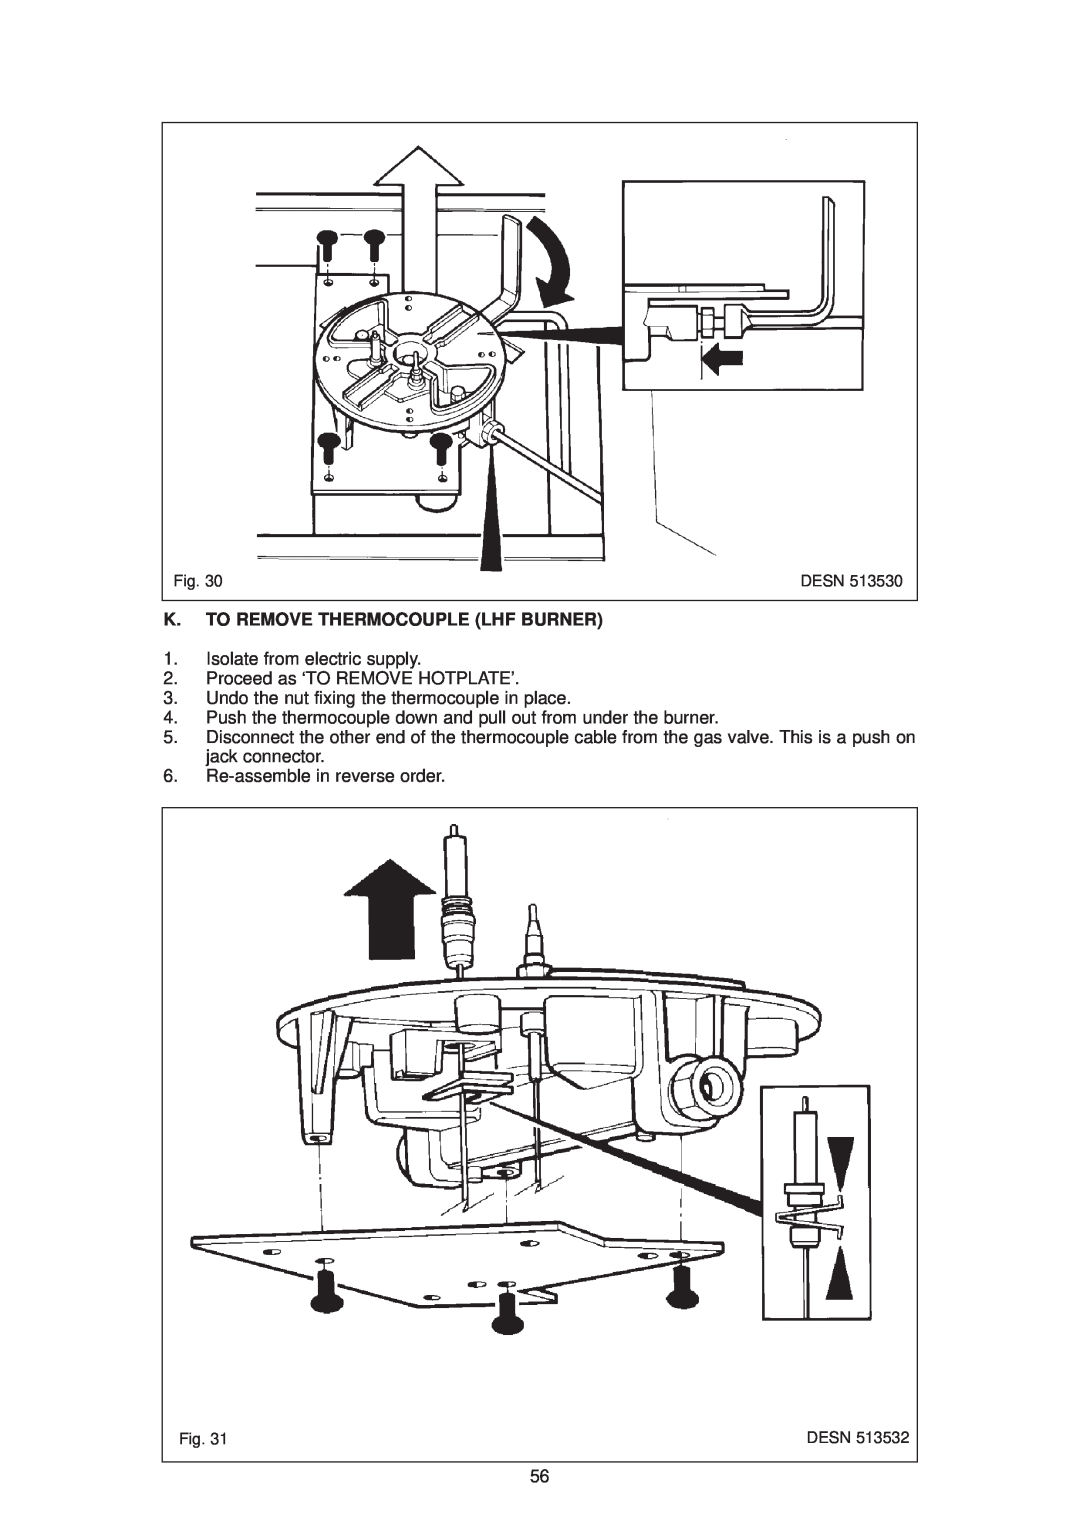 Aga Ranges DESN 512387 A owner manual K. To Remove Thermocouple Lhf Burner, Undo the nut fixing the thermocouple in place 